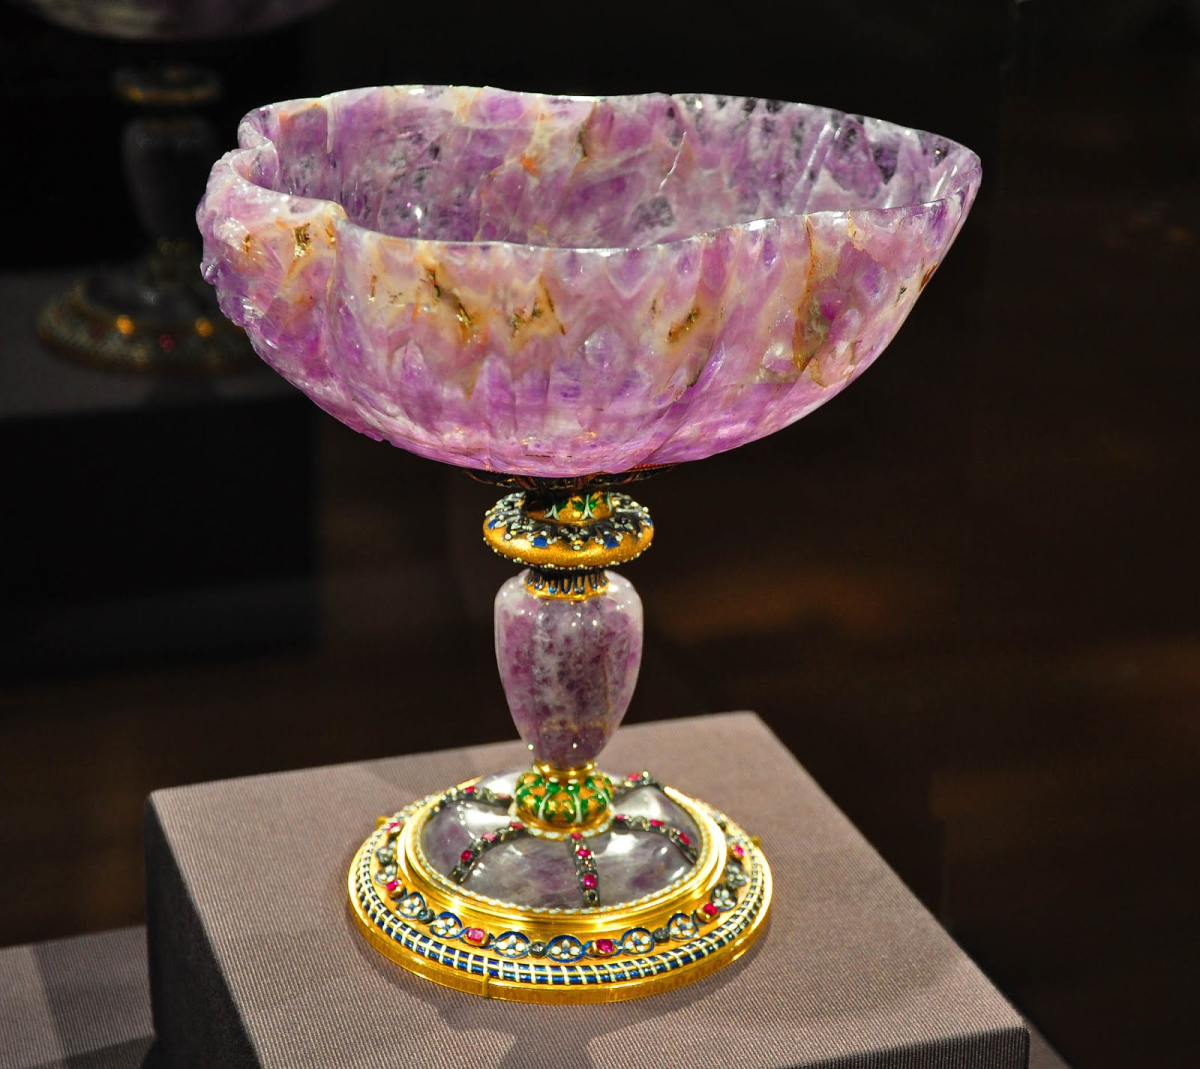 An amethyst cup from the Louvre museum